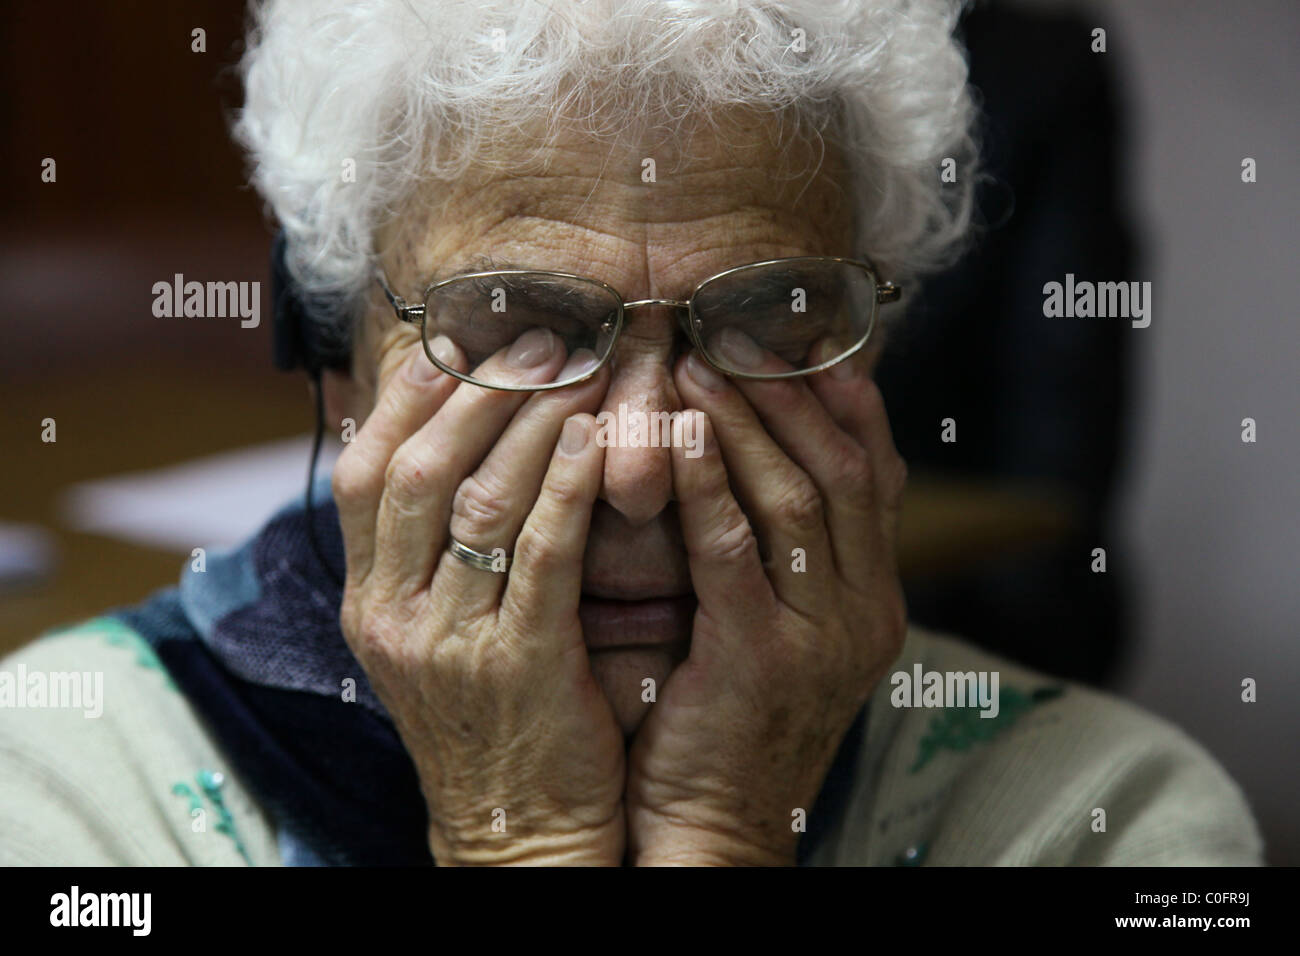 An old woman wipes away tears as she cry Stock Photo